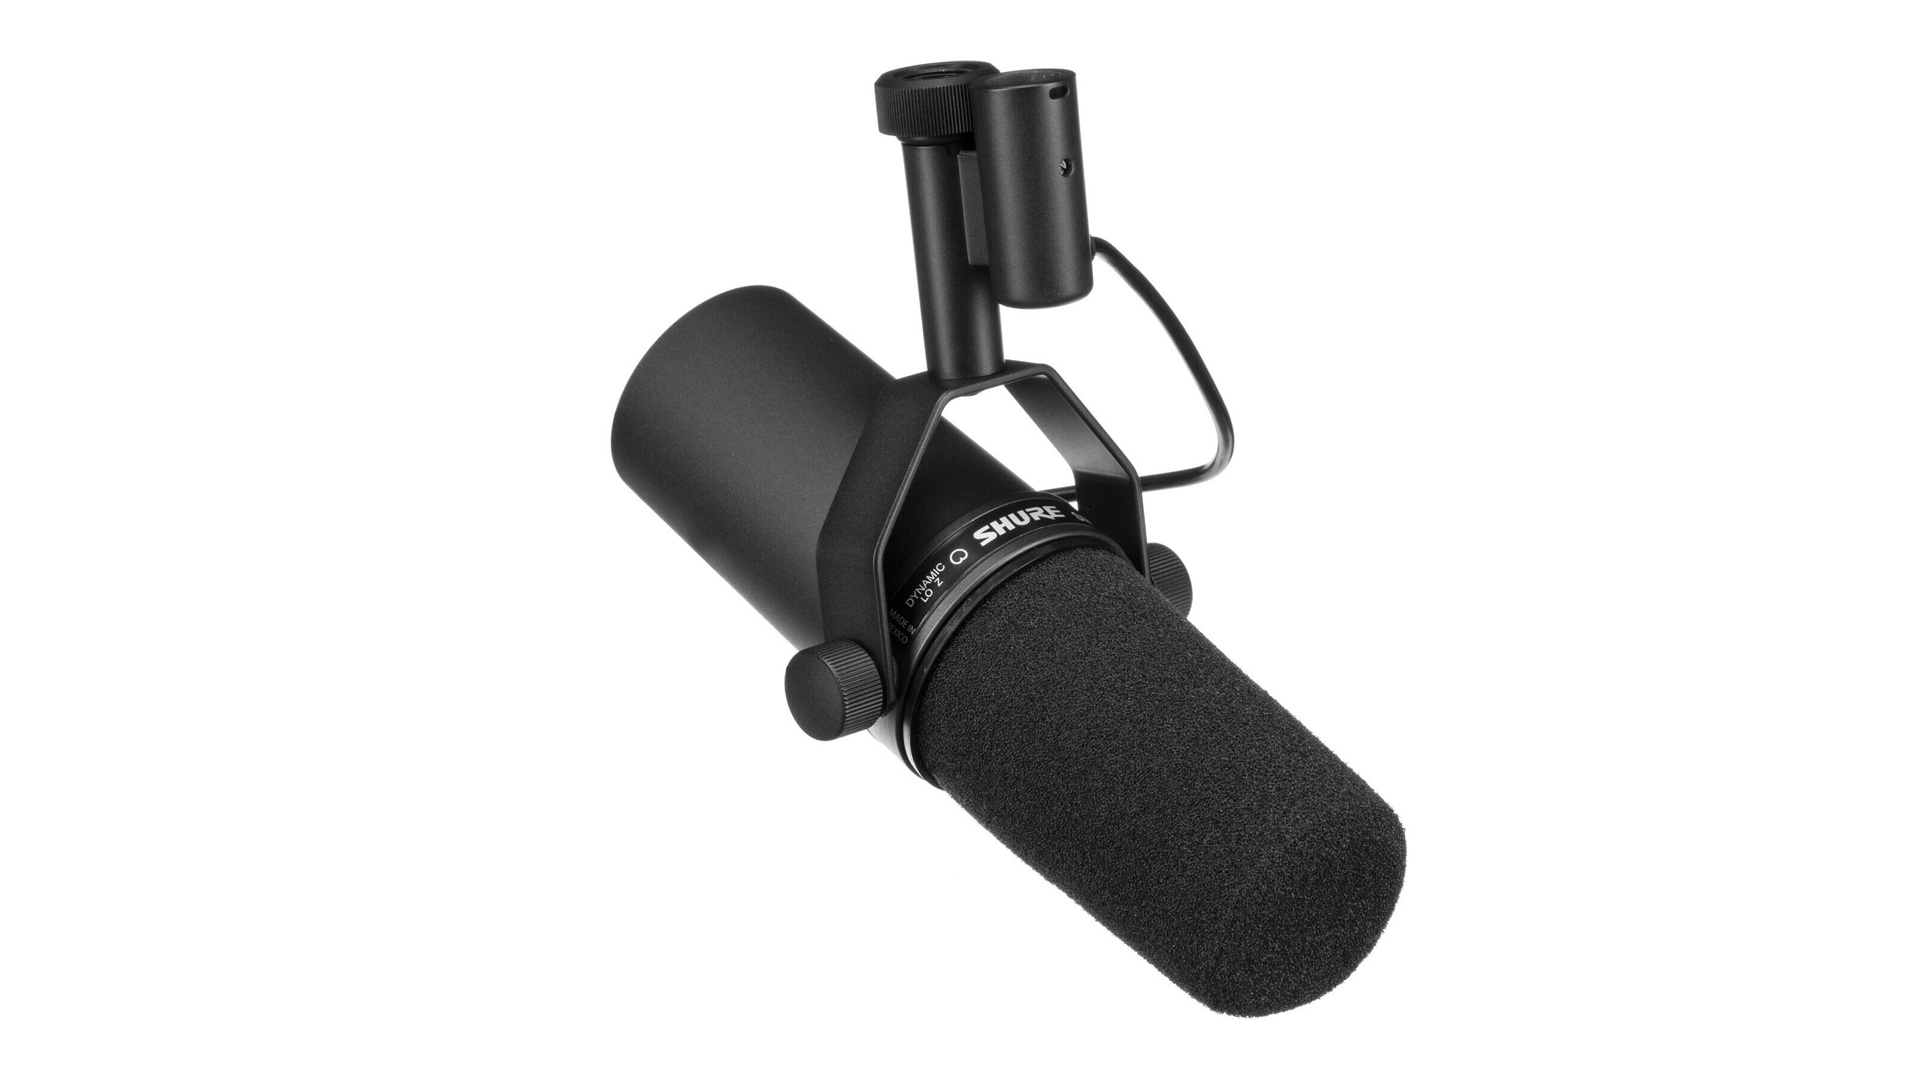 Shure SM7dB microphone launches with built-in preamp